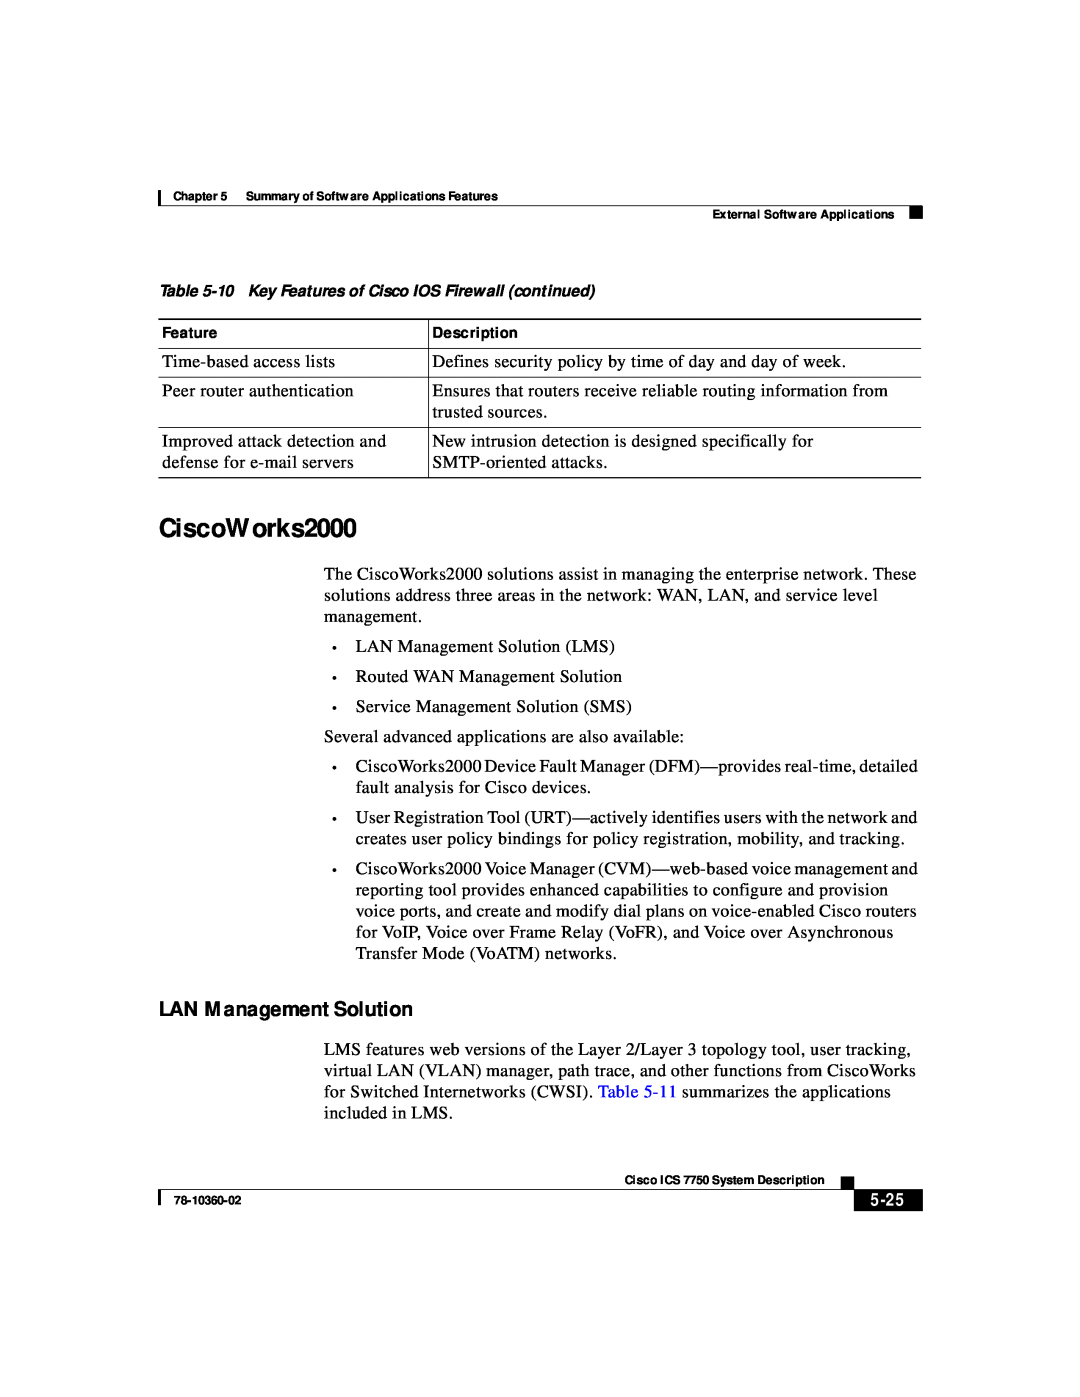 Cisco Systems ICS-7750 manual CiscoWorks2000, LAN Management Solution, 5-25 